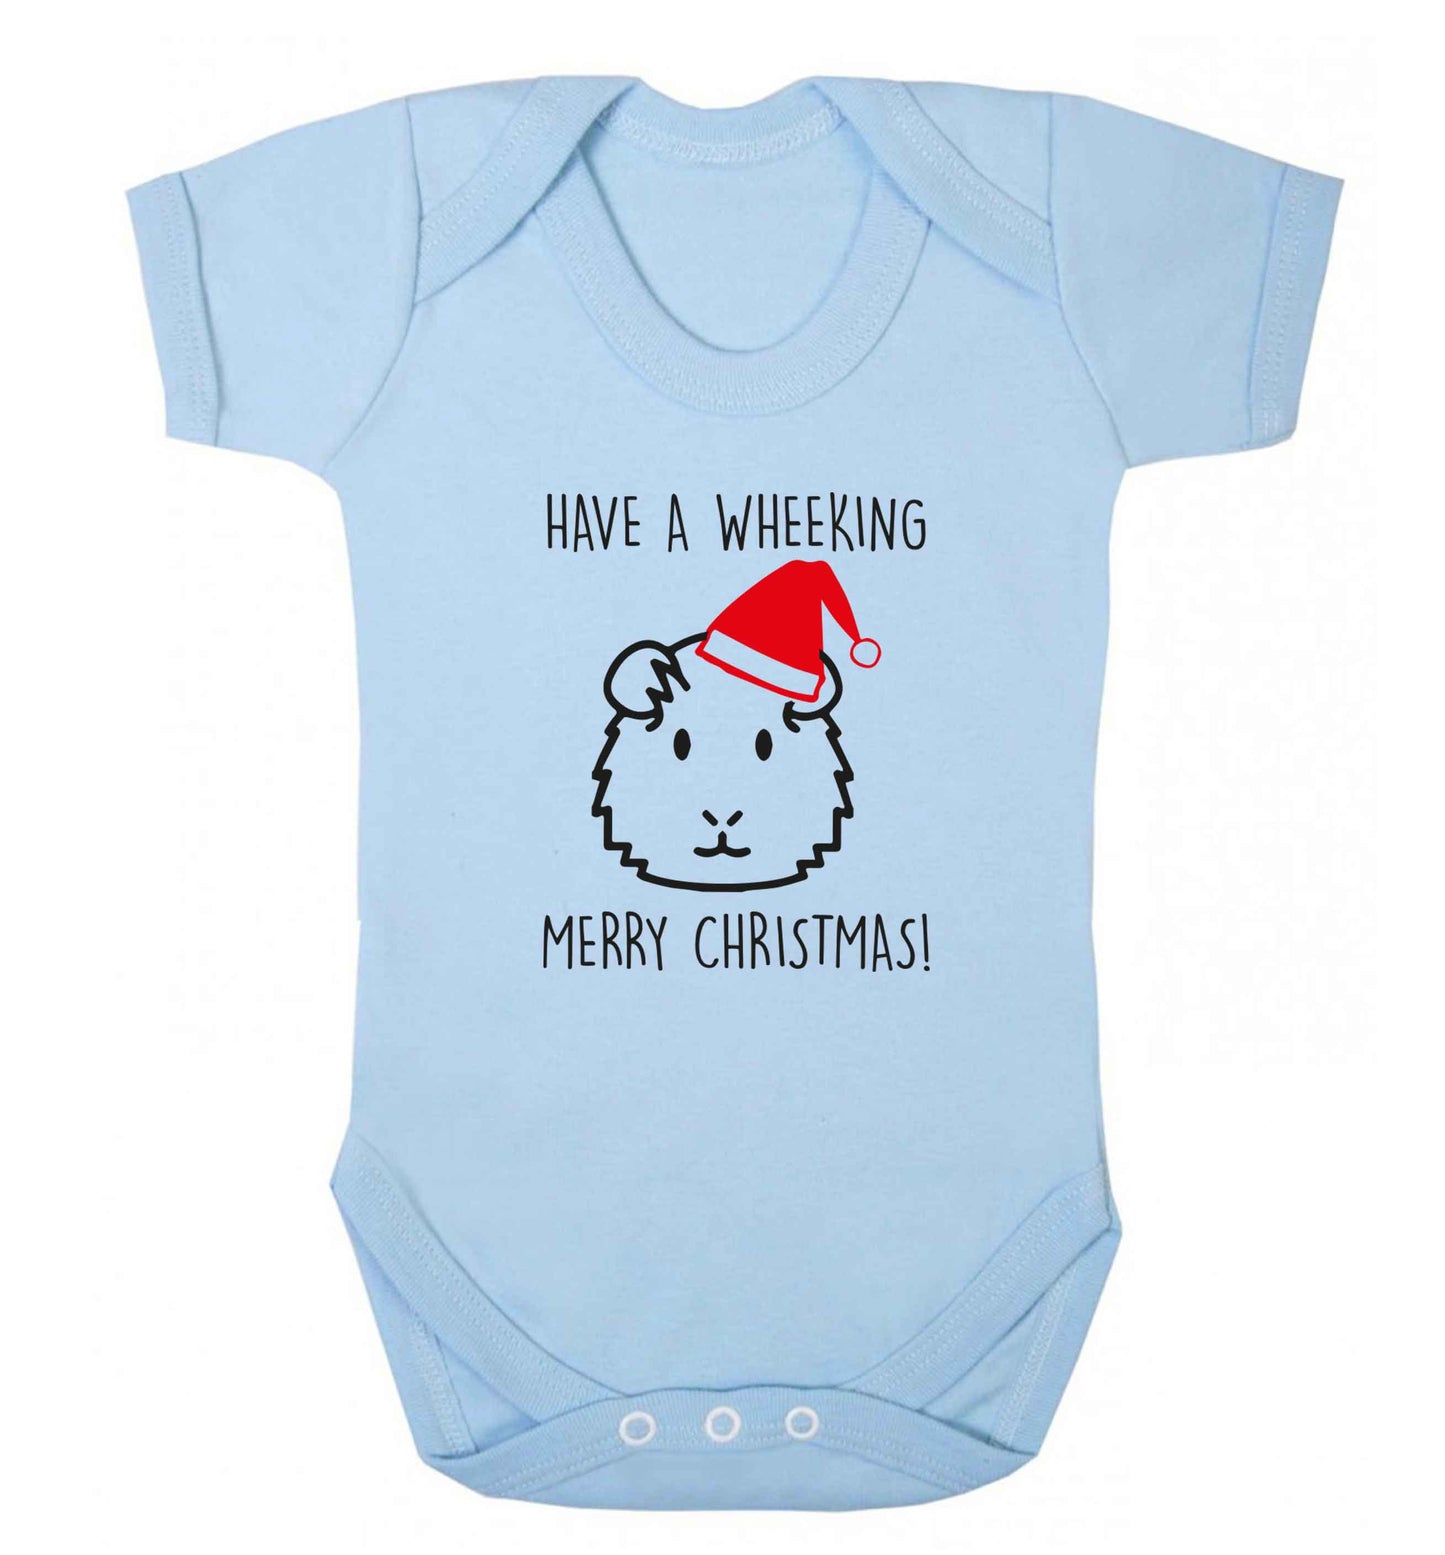 Have a wheeking merry Christmas baby vest pale blue 18-24 months